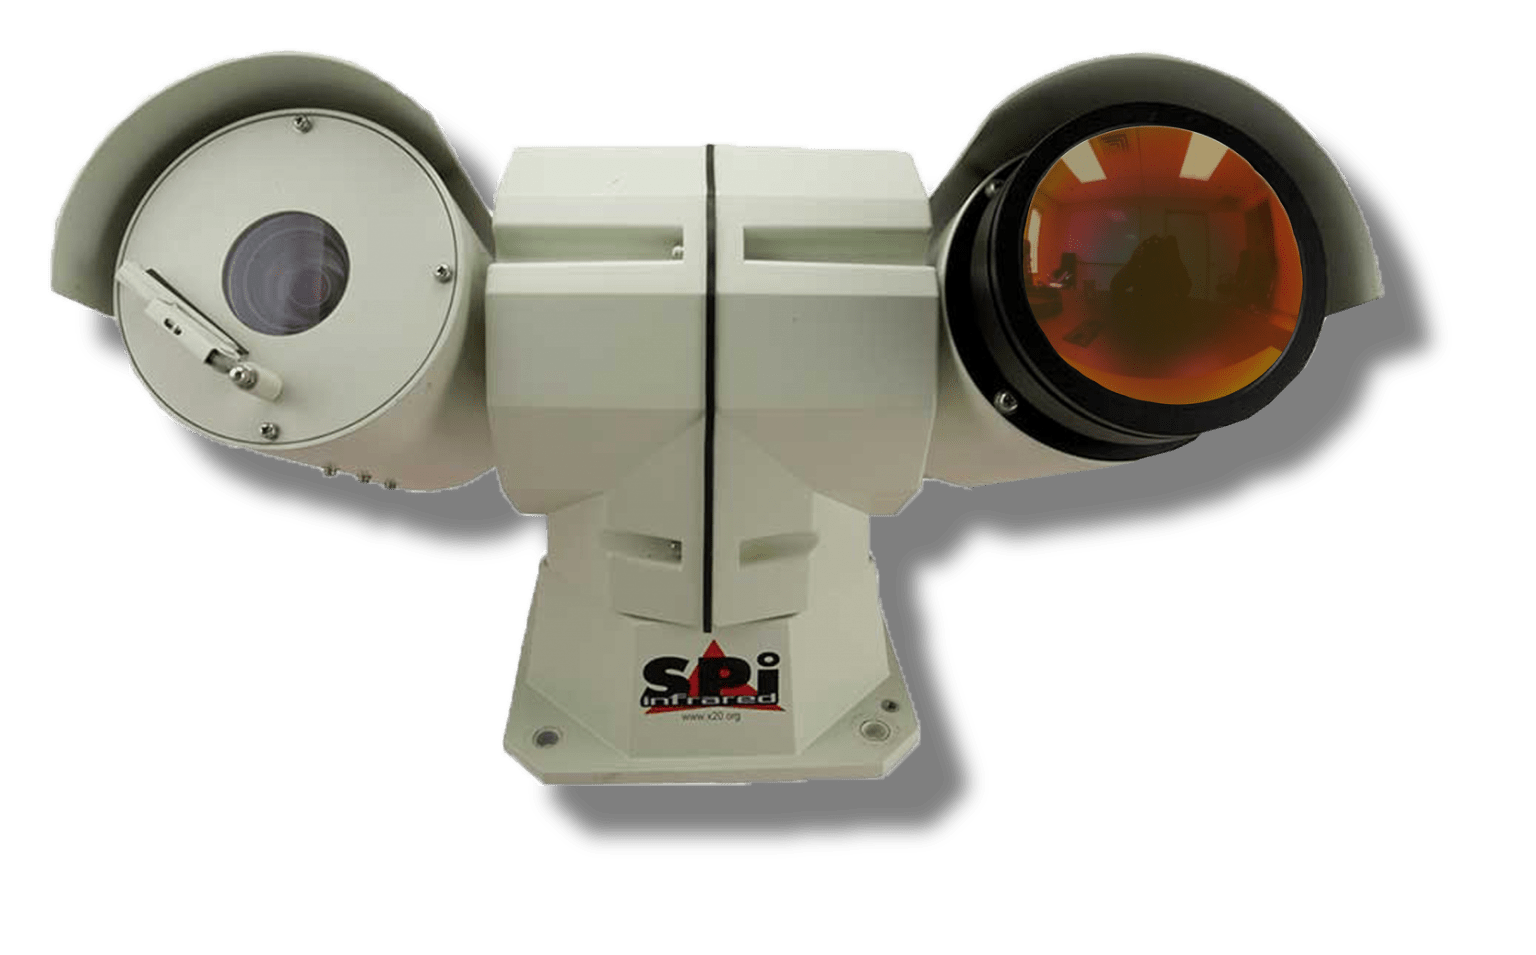 The M5 multi sensor PTZ imaging system is rugged, all weather simple to use day/night imaging system. High grade Advanced Sensors and optics can be integrated to match your application.